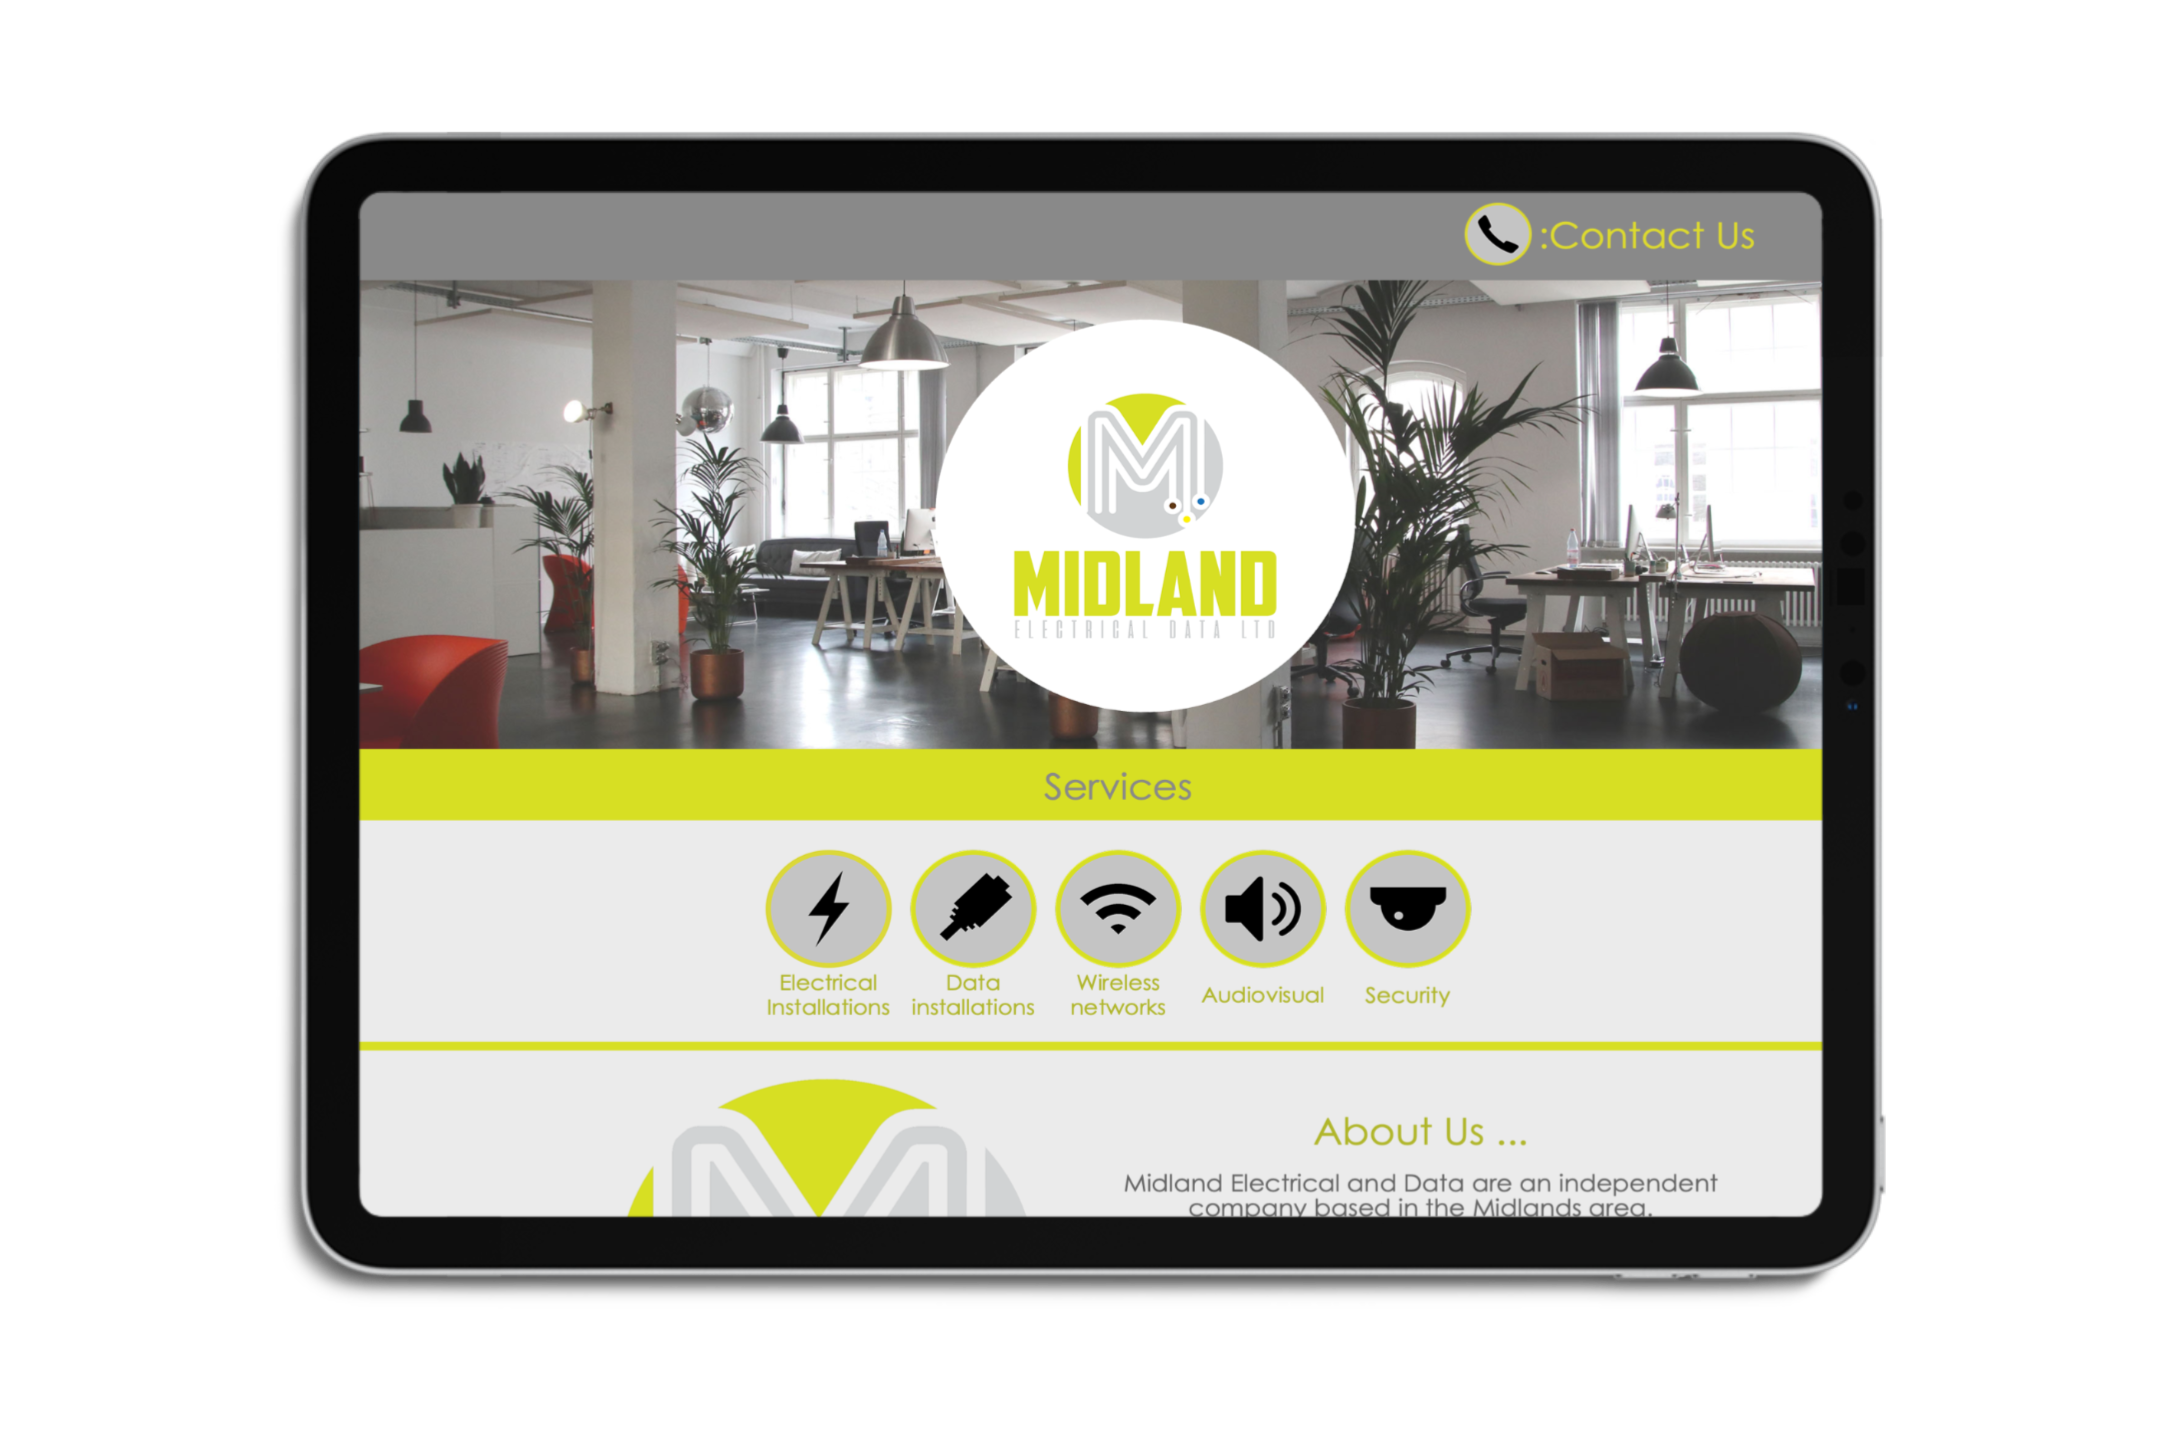 Midland-Electrical-and-Data